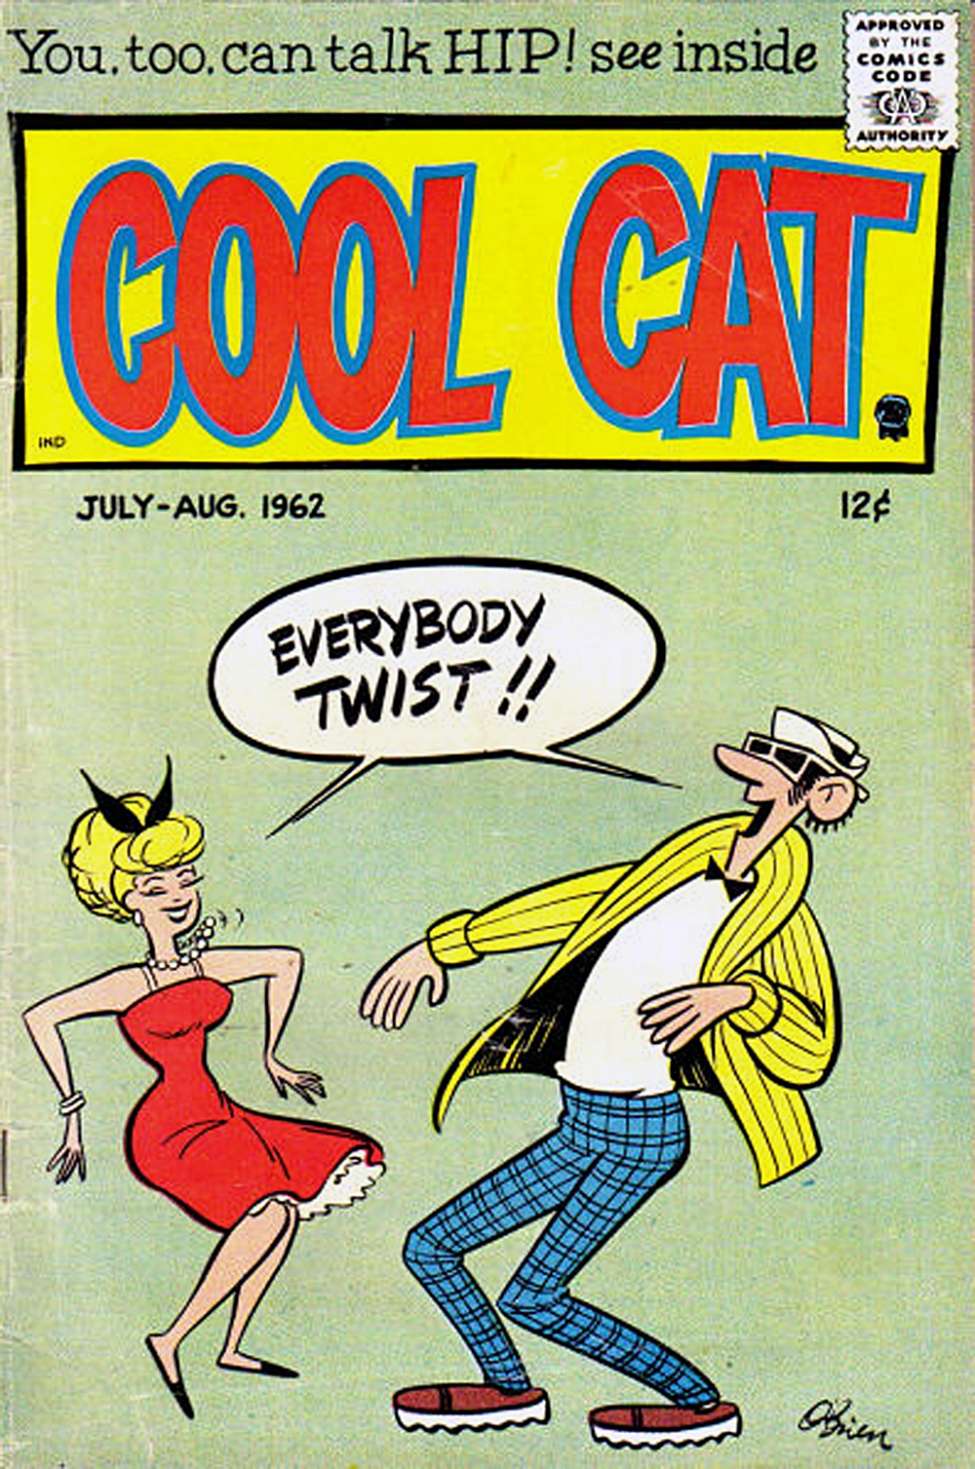 Comic Book Cover For Cool Cat v9 2